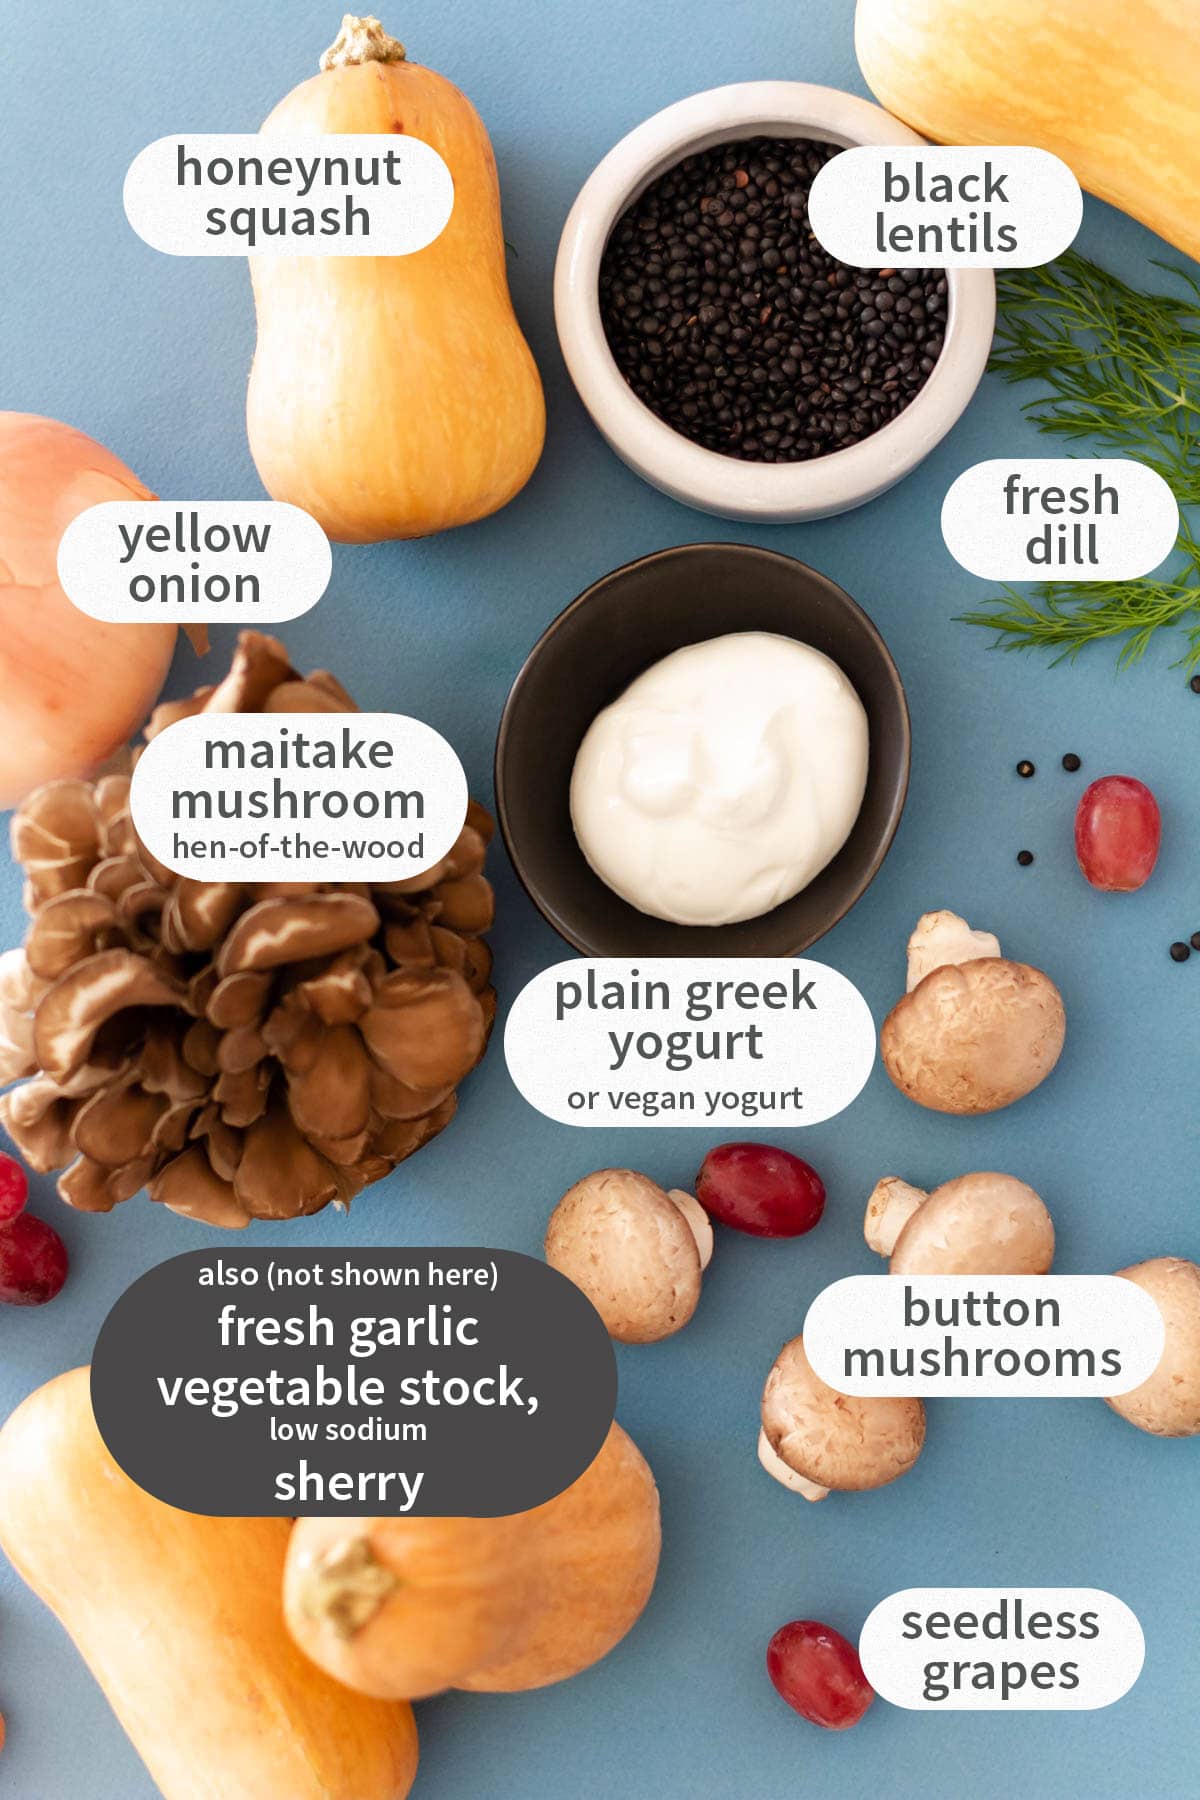 Ingredients for this roasted honeynut squash recipe laid out on a blue background with each ingredient labeled with text.